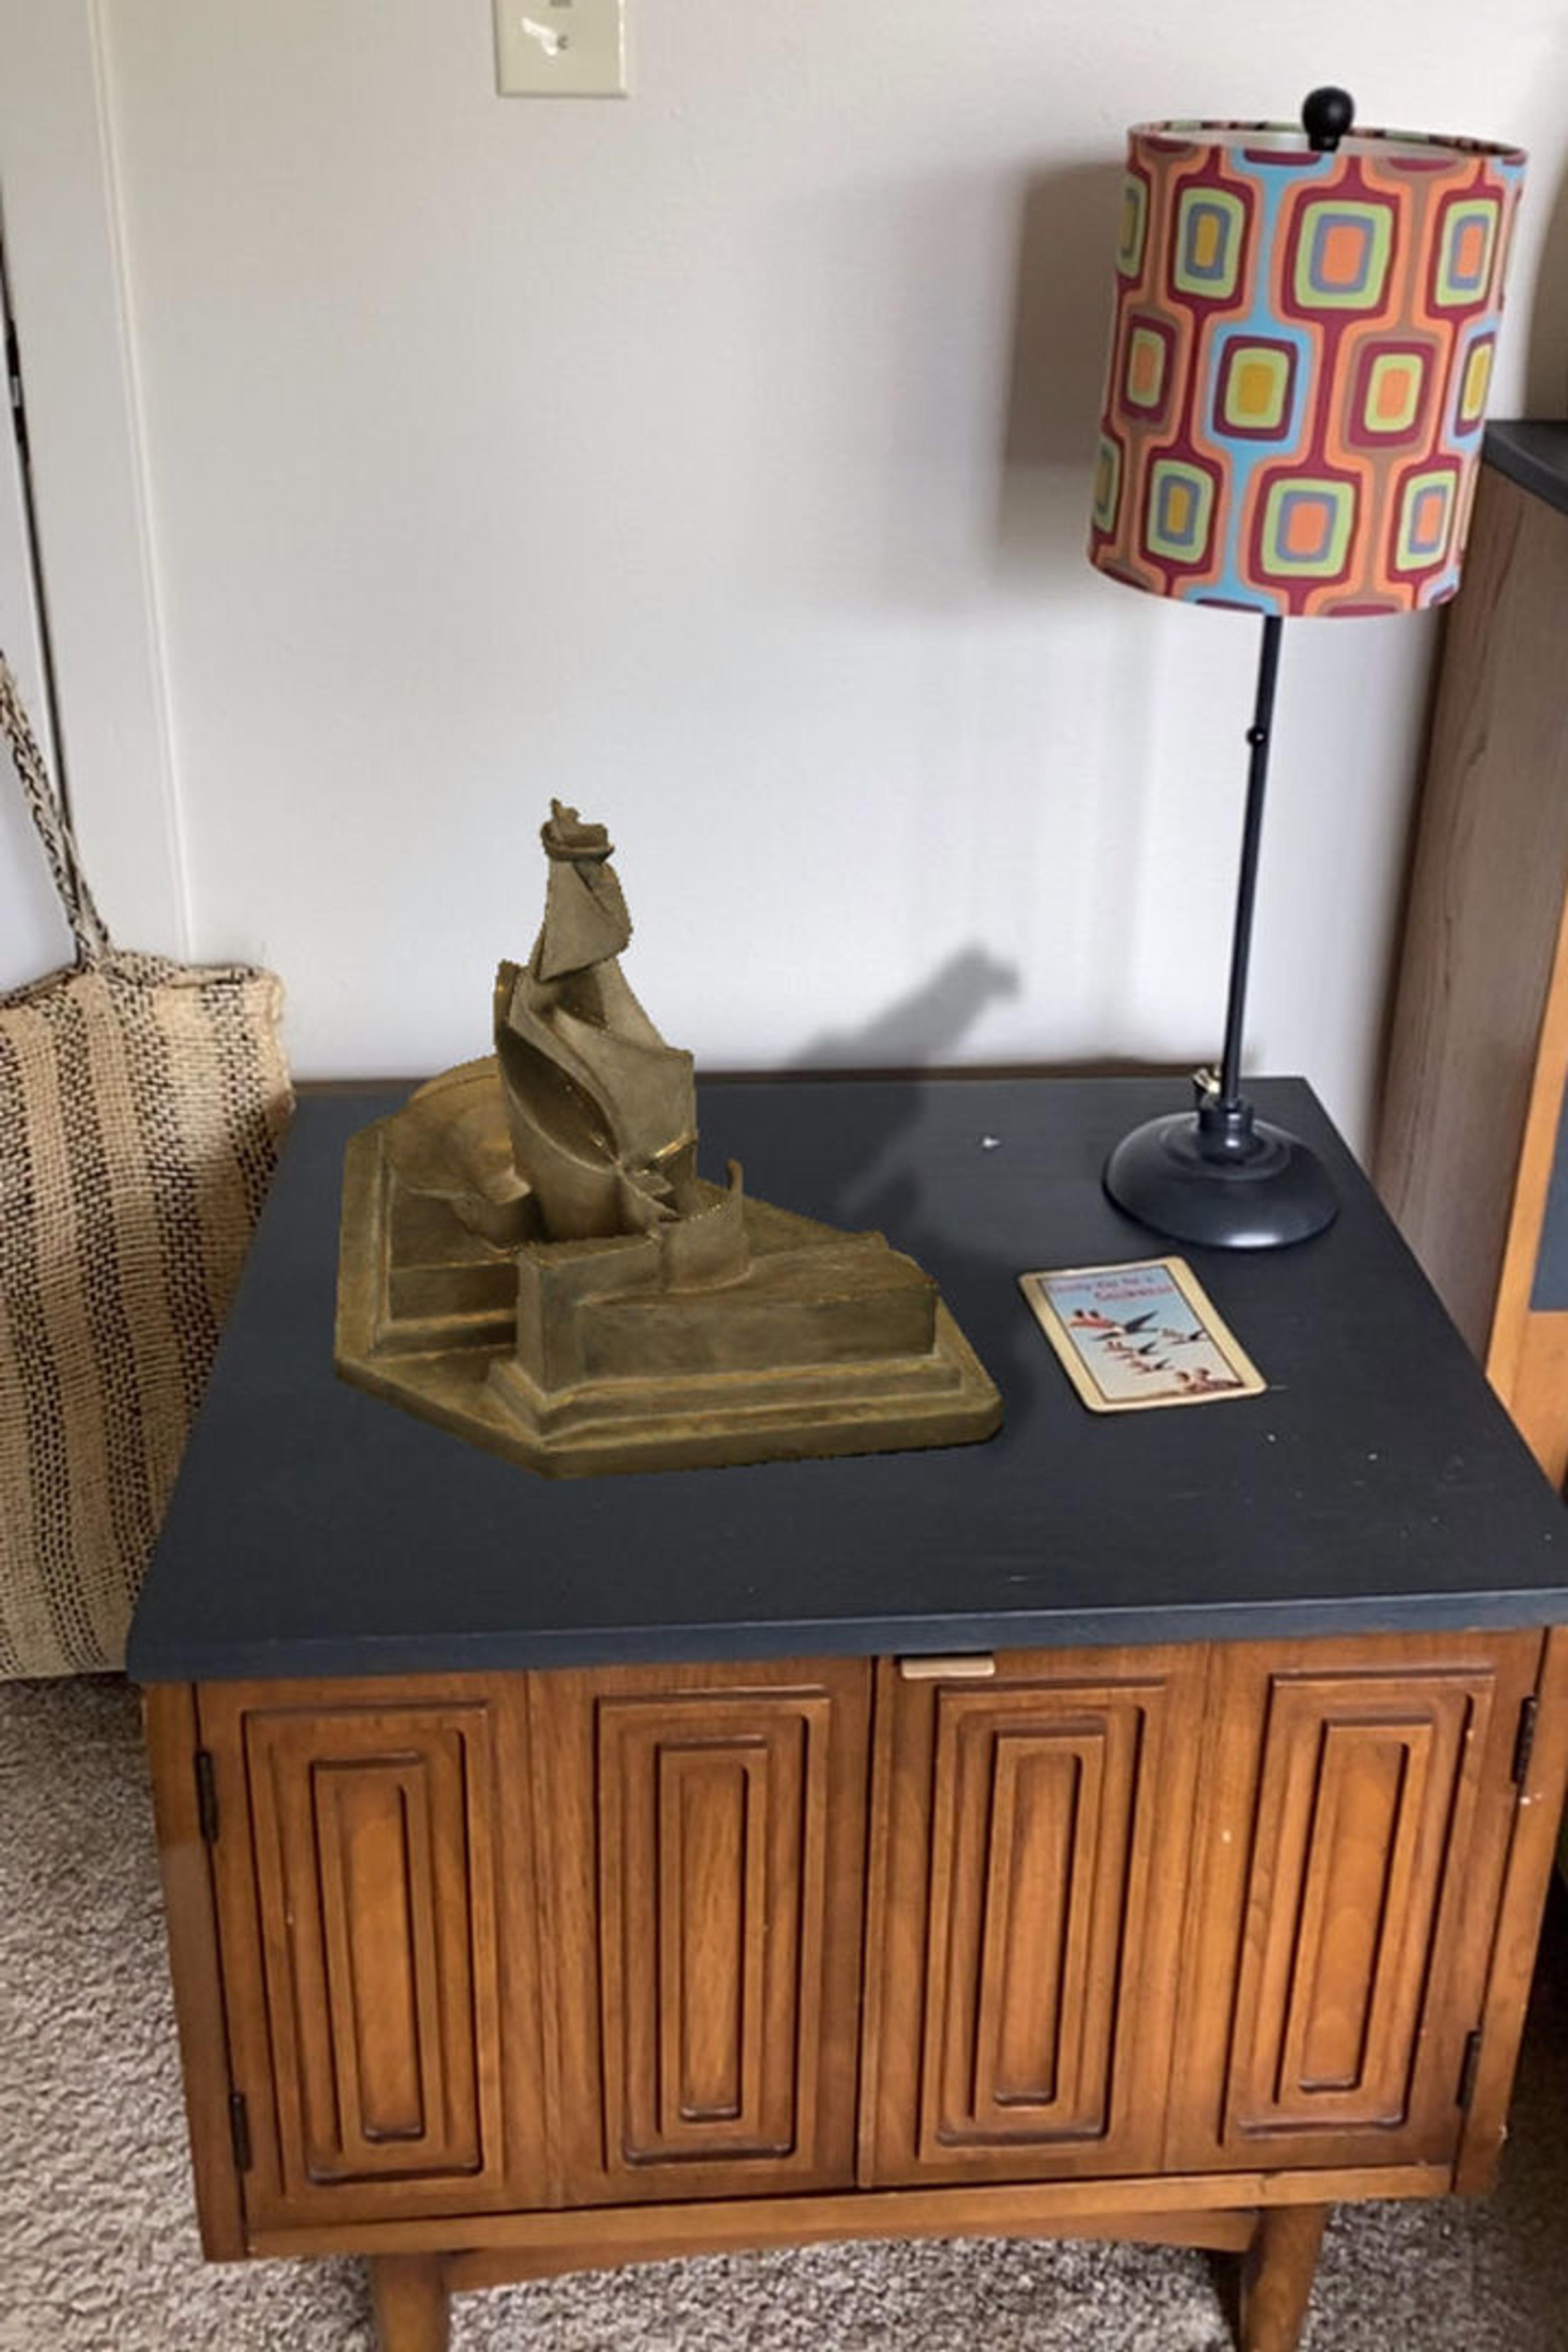 An augmented image of Umberto Boccioni’s Development of a Bottle in Space on a side table beside a lamp